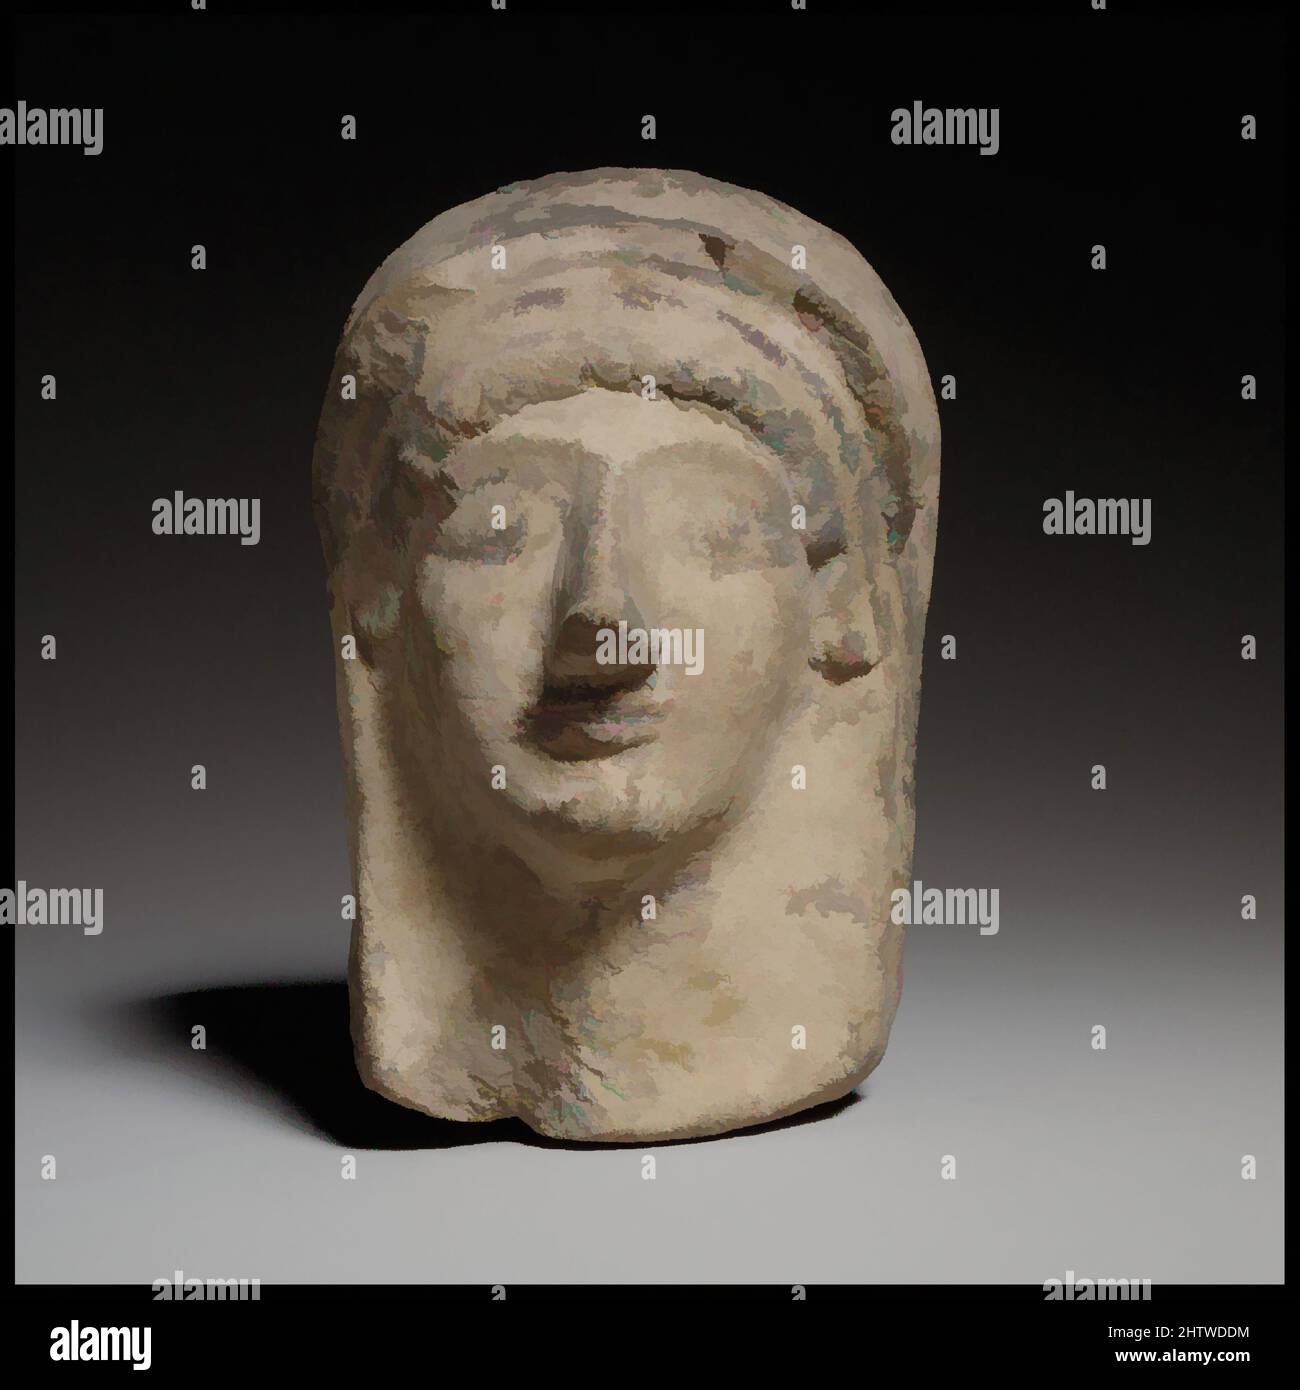 Art inspired by Female protome-mask, Late Cypro-Archaic II, end of the 6th century B.C., Cypriot, Terracotta; mold-made, H. 5 5/16 in. (13.5 cm), Terracottas, The protome-mask is mold-made. It has a pointed nose, a prominent chin, large eyes, and ridged eyebrows. A fringe of curly hair, Classic works modernized by Artotop with a splash of modernity. Shapes, color and value, eye-catching visual impact on art. Emotions through freedom of artworks in a contemporary way. A timeless message pursuing a wildly creative new direction. Artists turning to the digital medium and creating the Artotop NFT Stock Photo